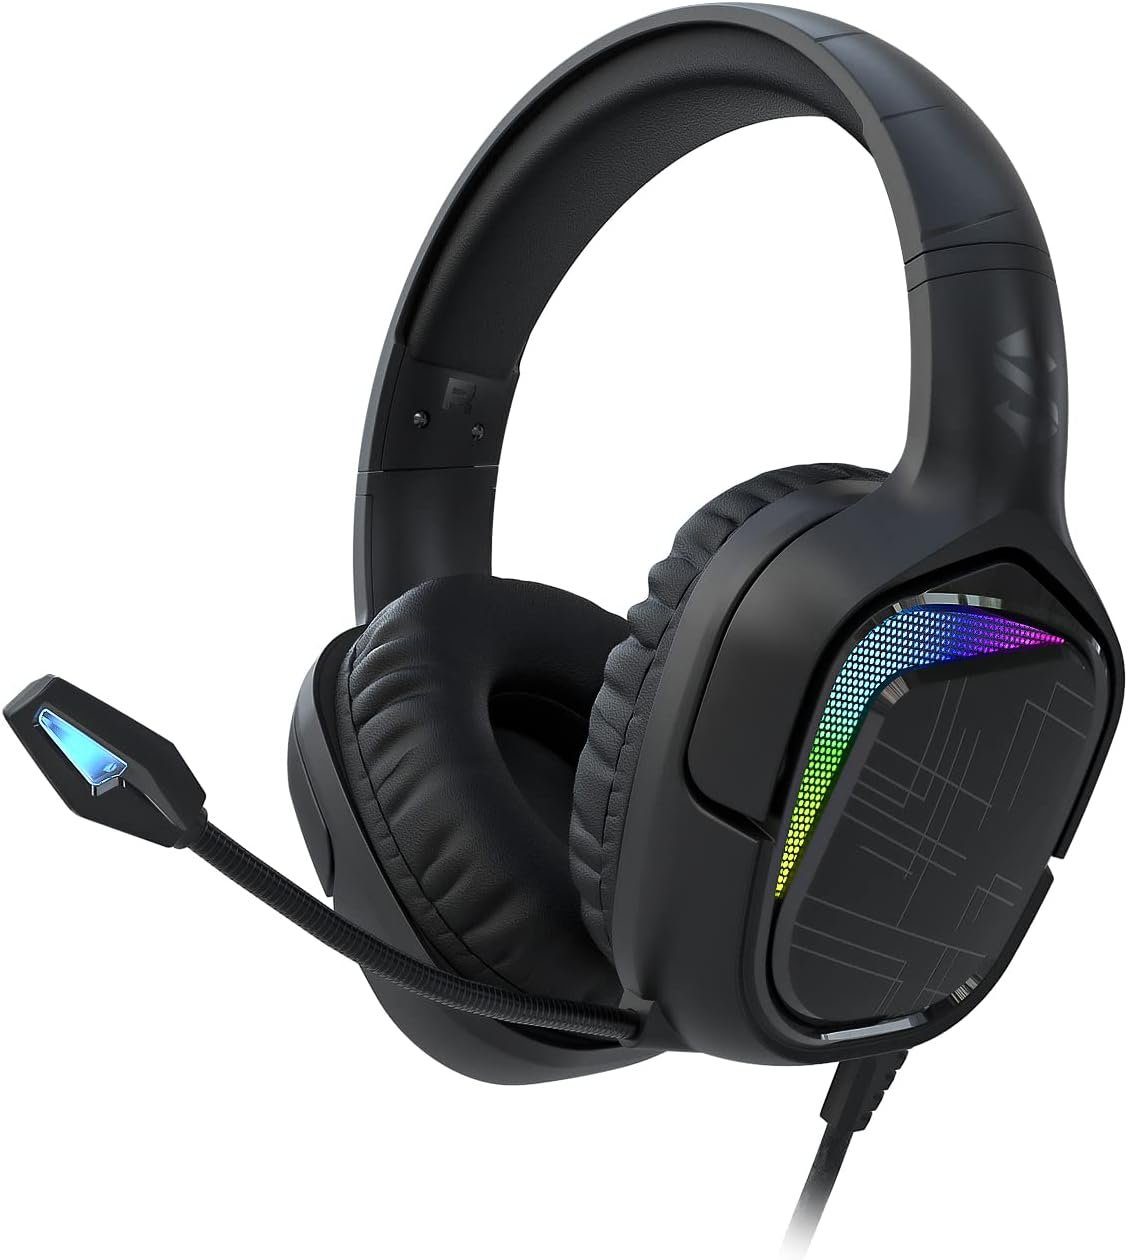 Black Shark Gaming-Headset (Präzises räumliches Klangerlebnis, Gaming Headset für PC, PS4, PS5, Xbox, Switch, Gaming Навушники)